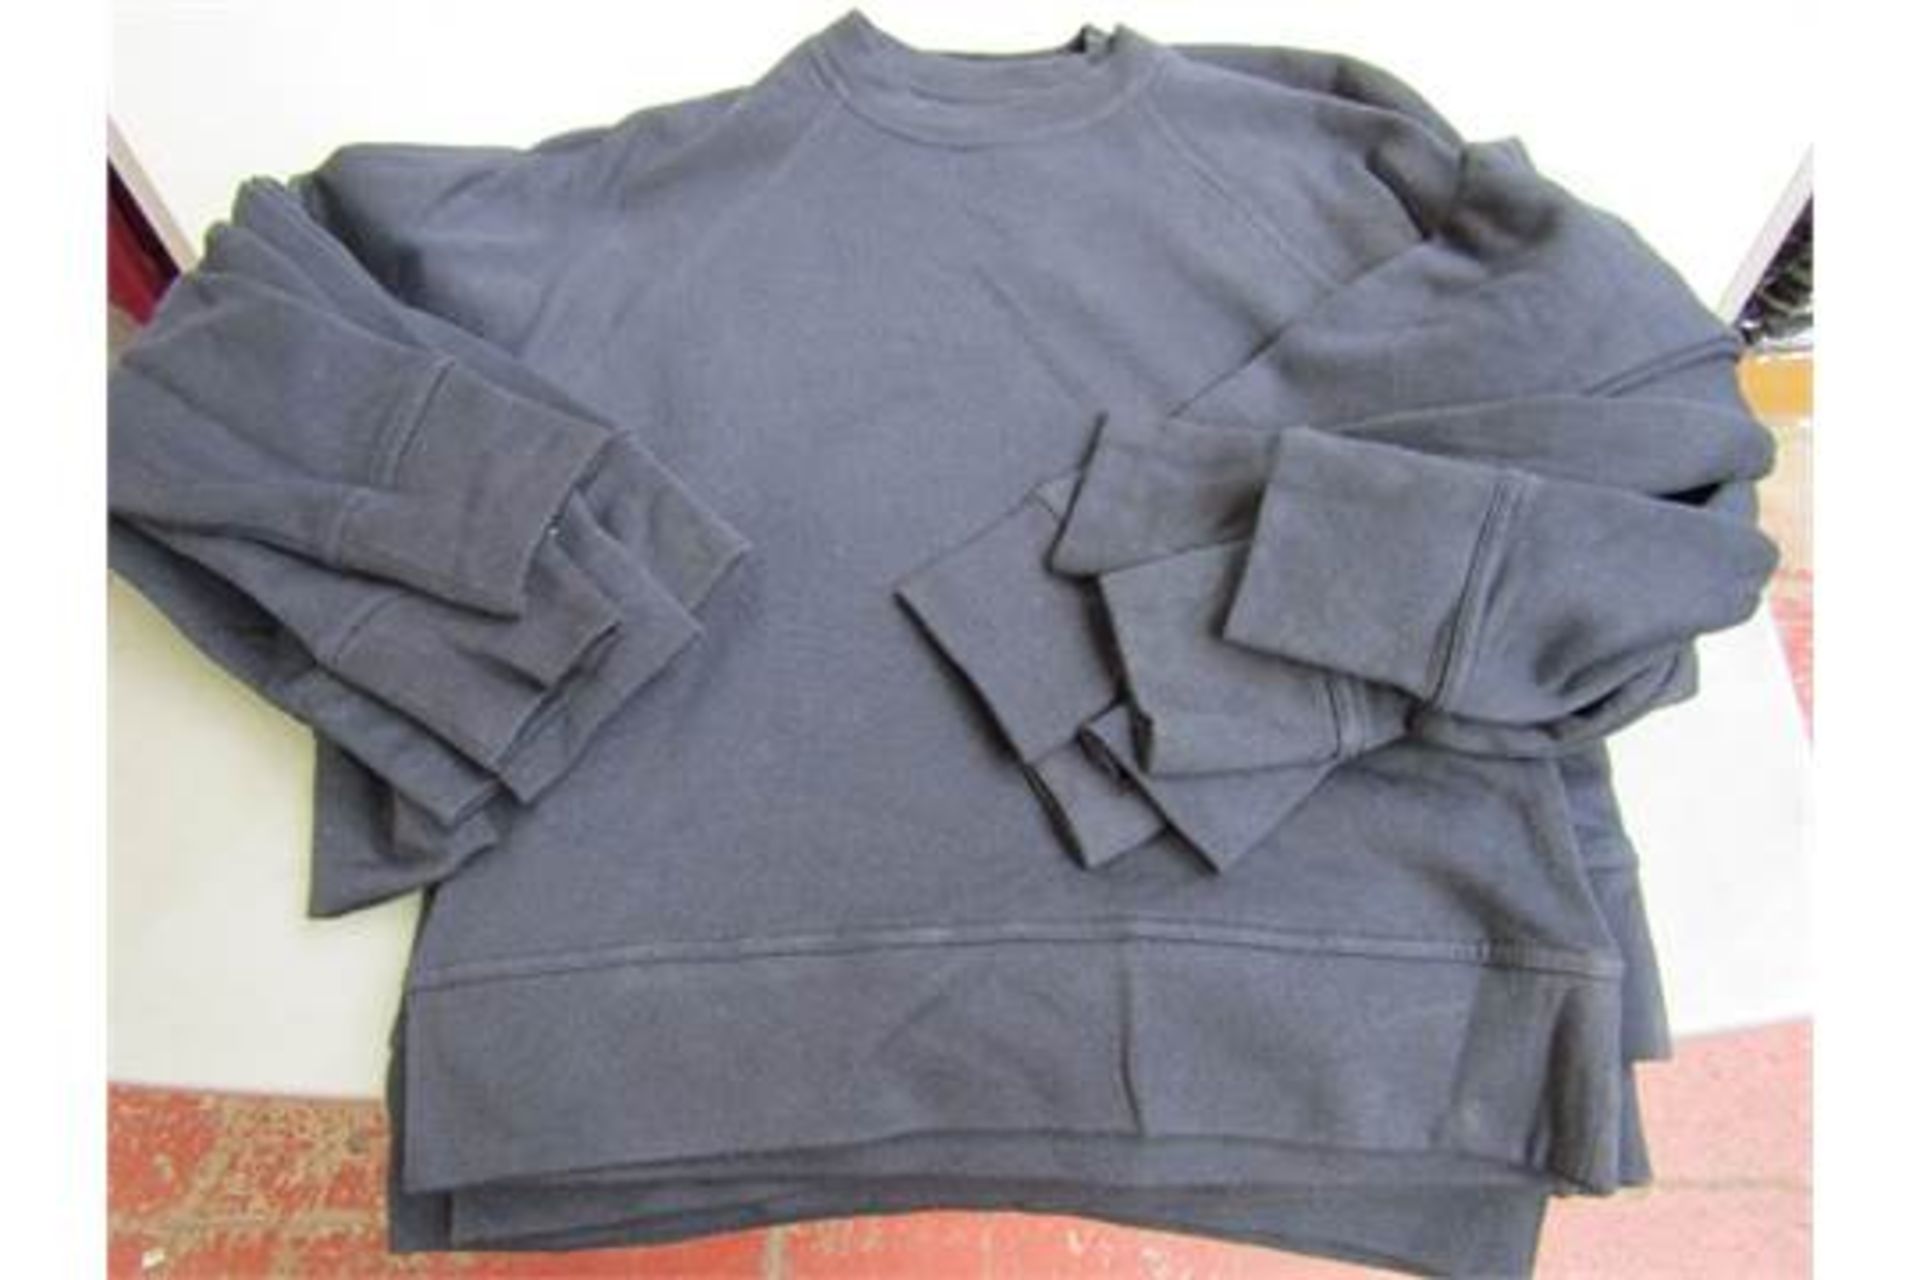 30x Jumpers Brand new various sizes